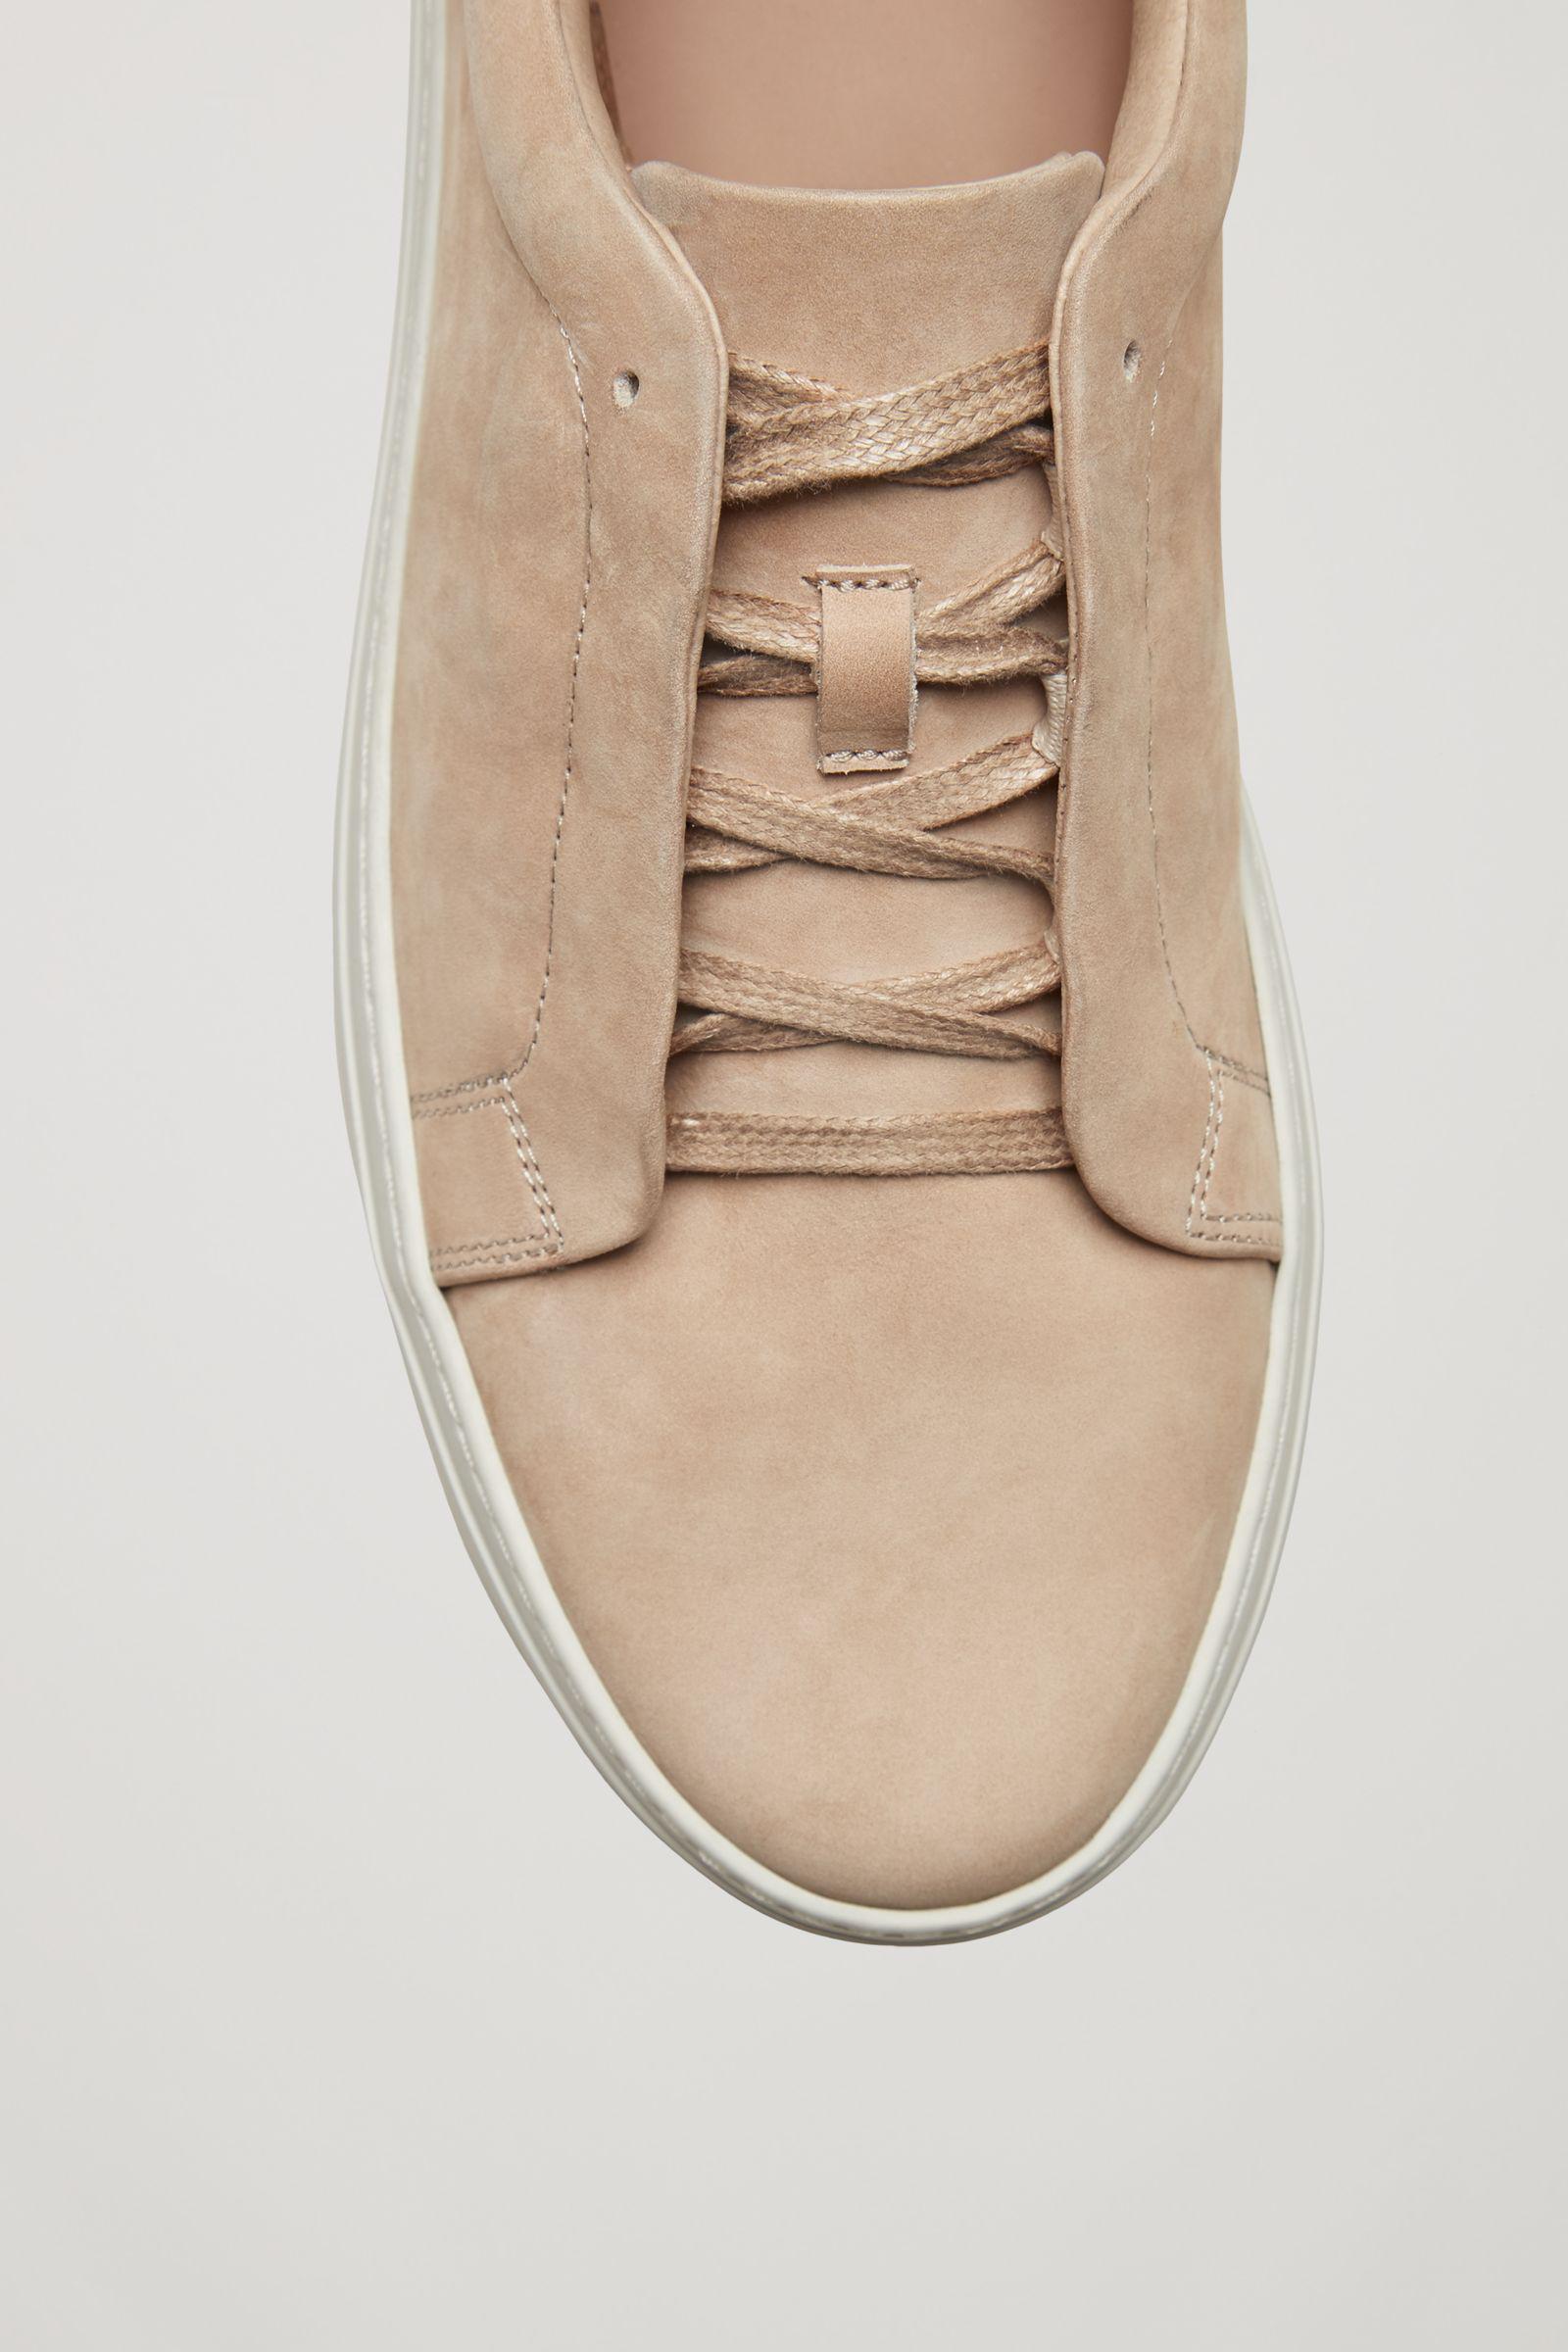 COS Leather Sneakers With Hidden Laces in Light Beige (Natural) - Lyst